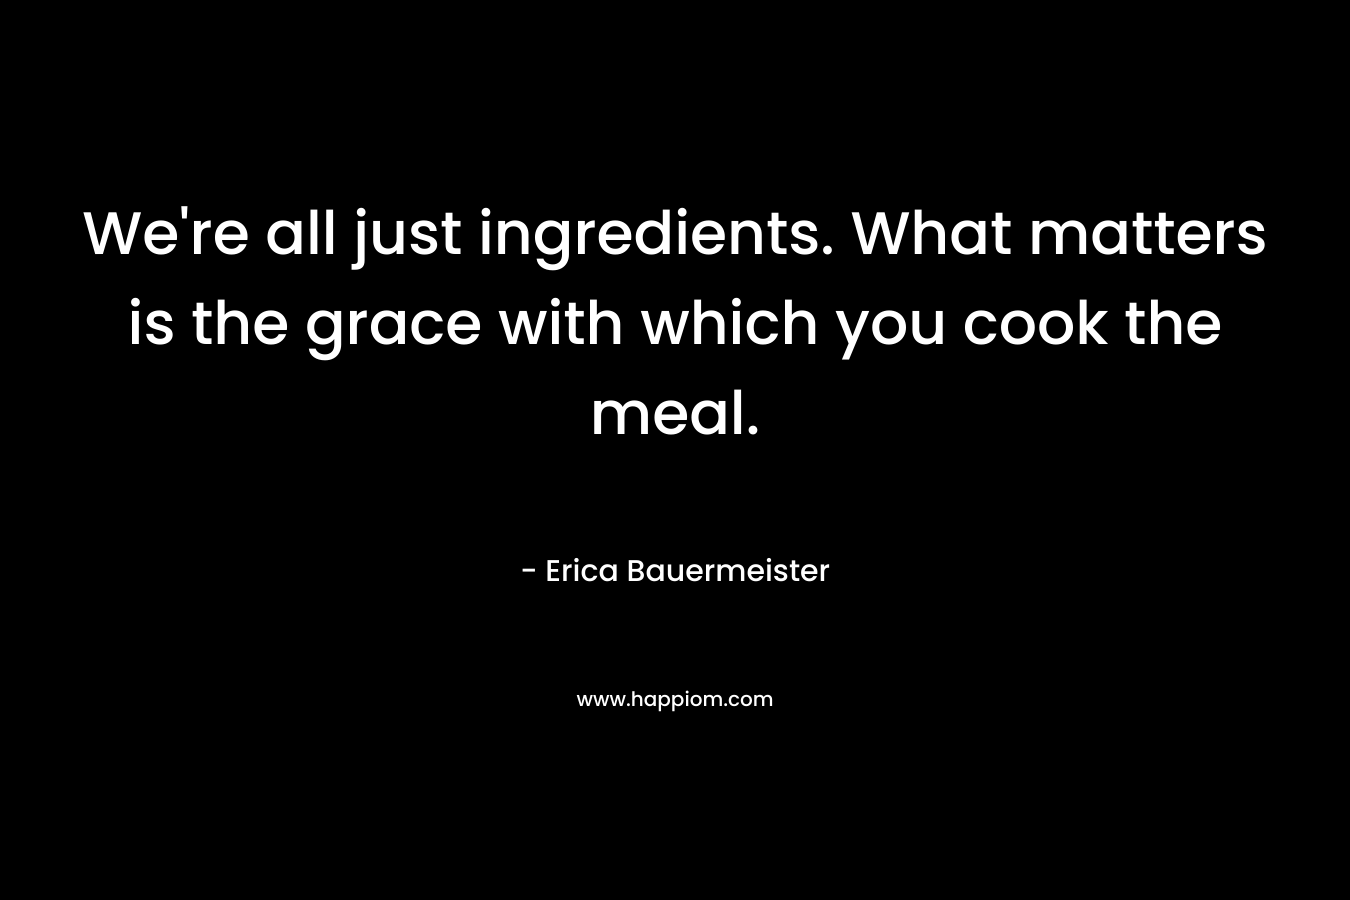 We're all just ingredients. What matters is the grace with which you cook the meal.